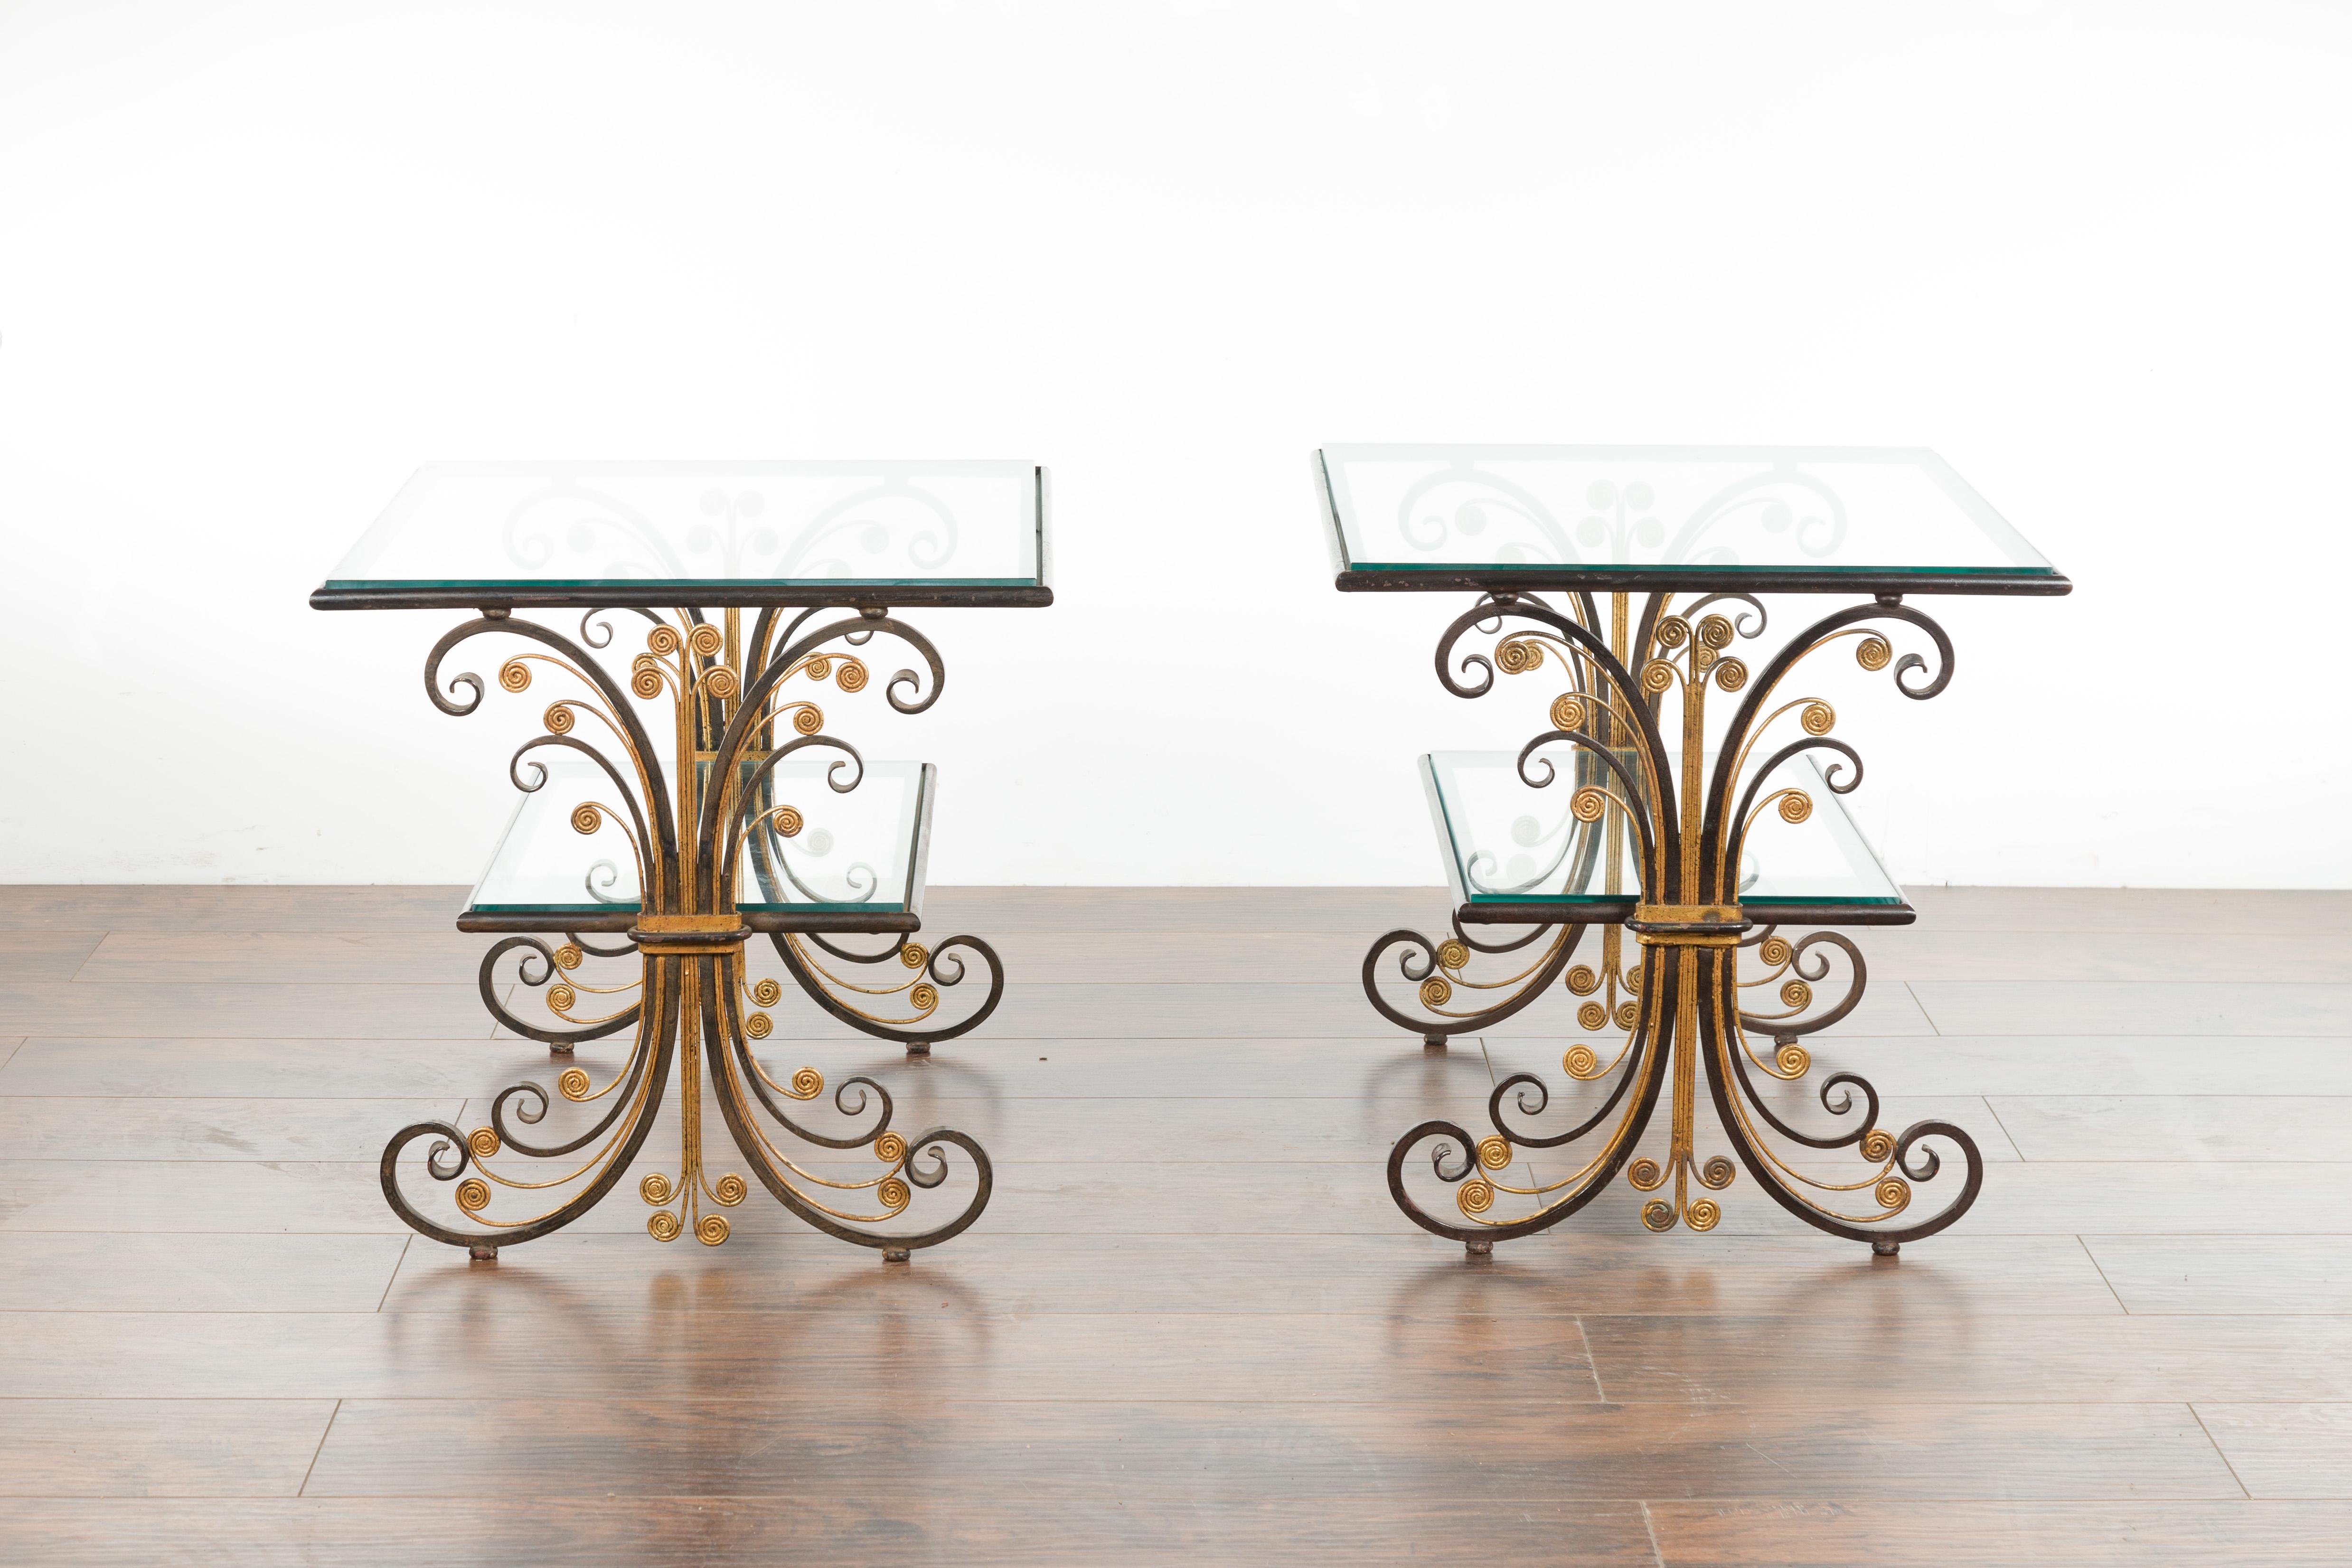 A pair of French Art Deco period iron and brass side tables from the mid-20th century, with scrolling effects and glass tops. Created in France during the second quarter of the 20th century, each of this pair of side tables features a rectangular